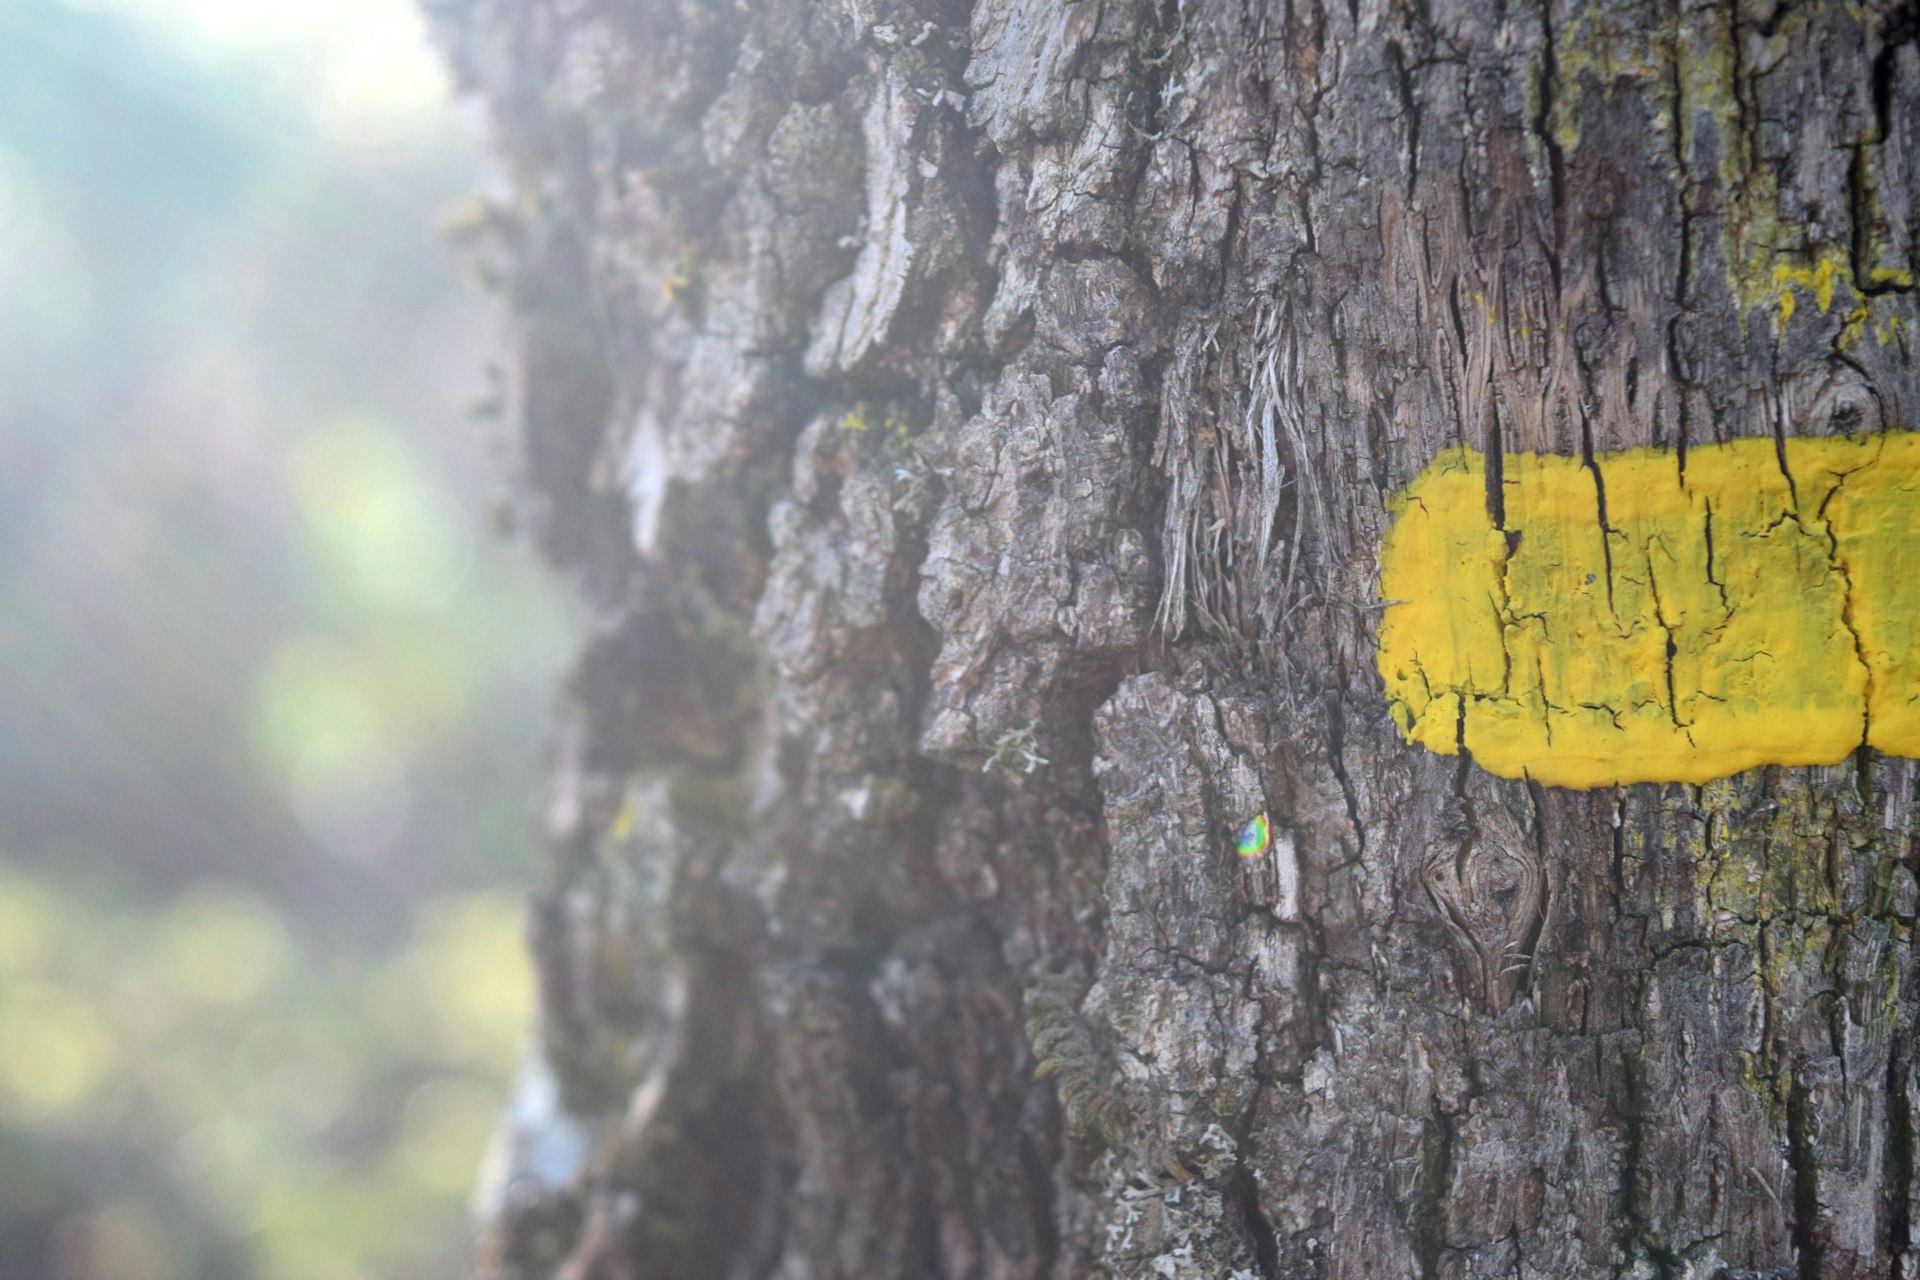 a close up of a yellow marker on a tree